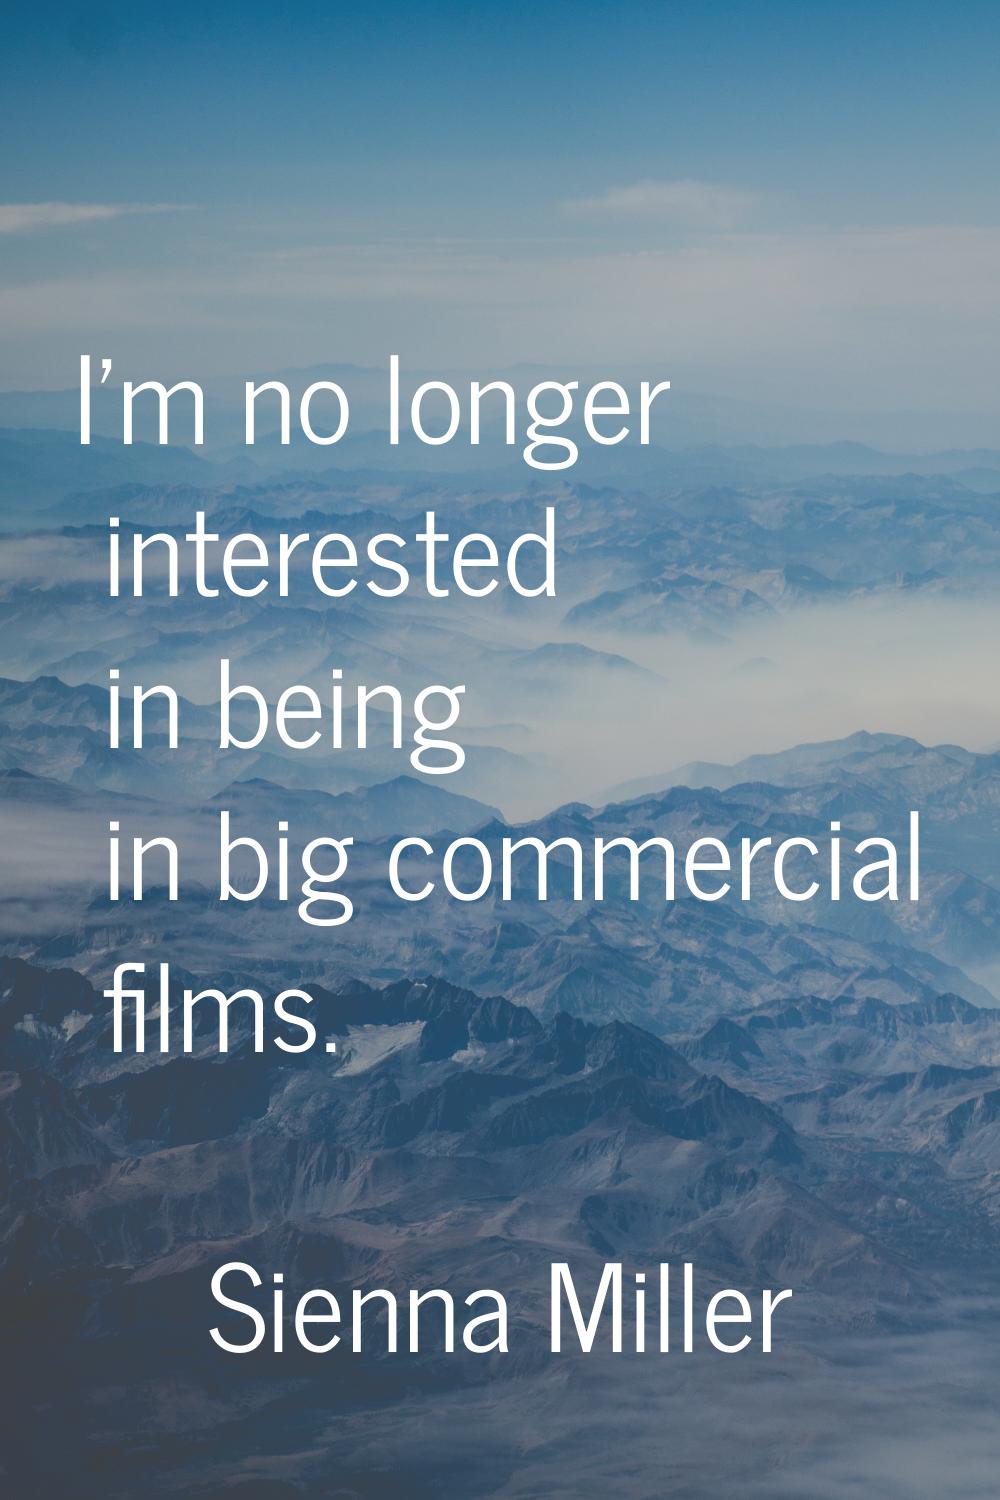 I'm no longer interested in being in big commercial films.